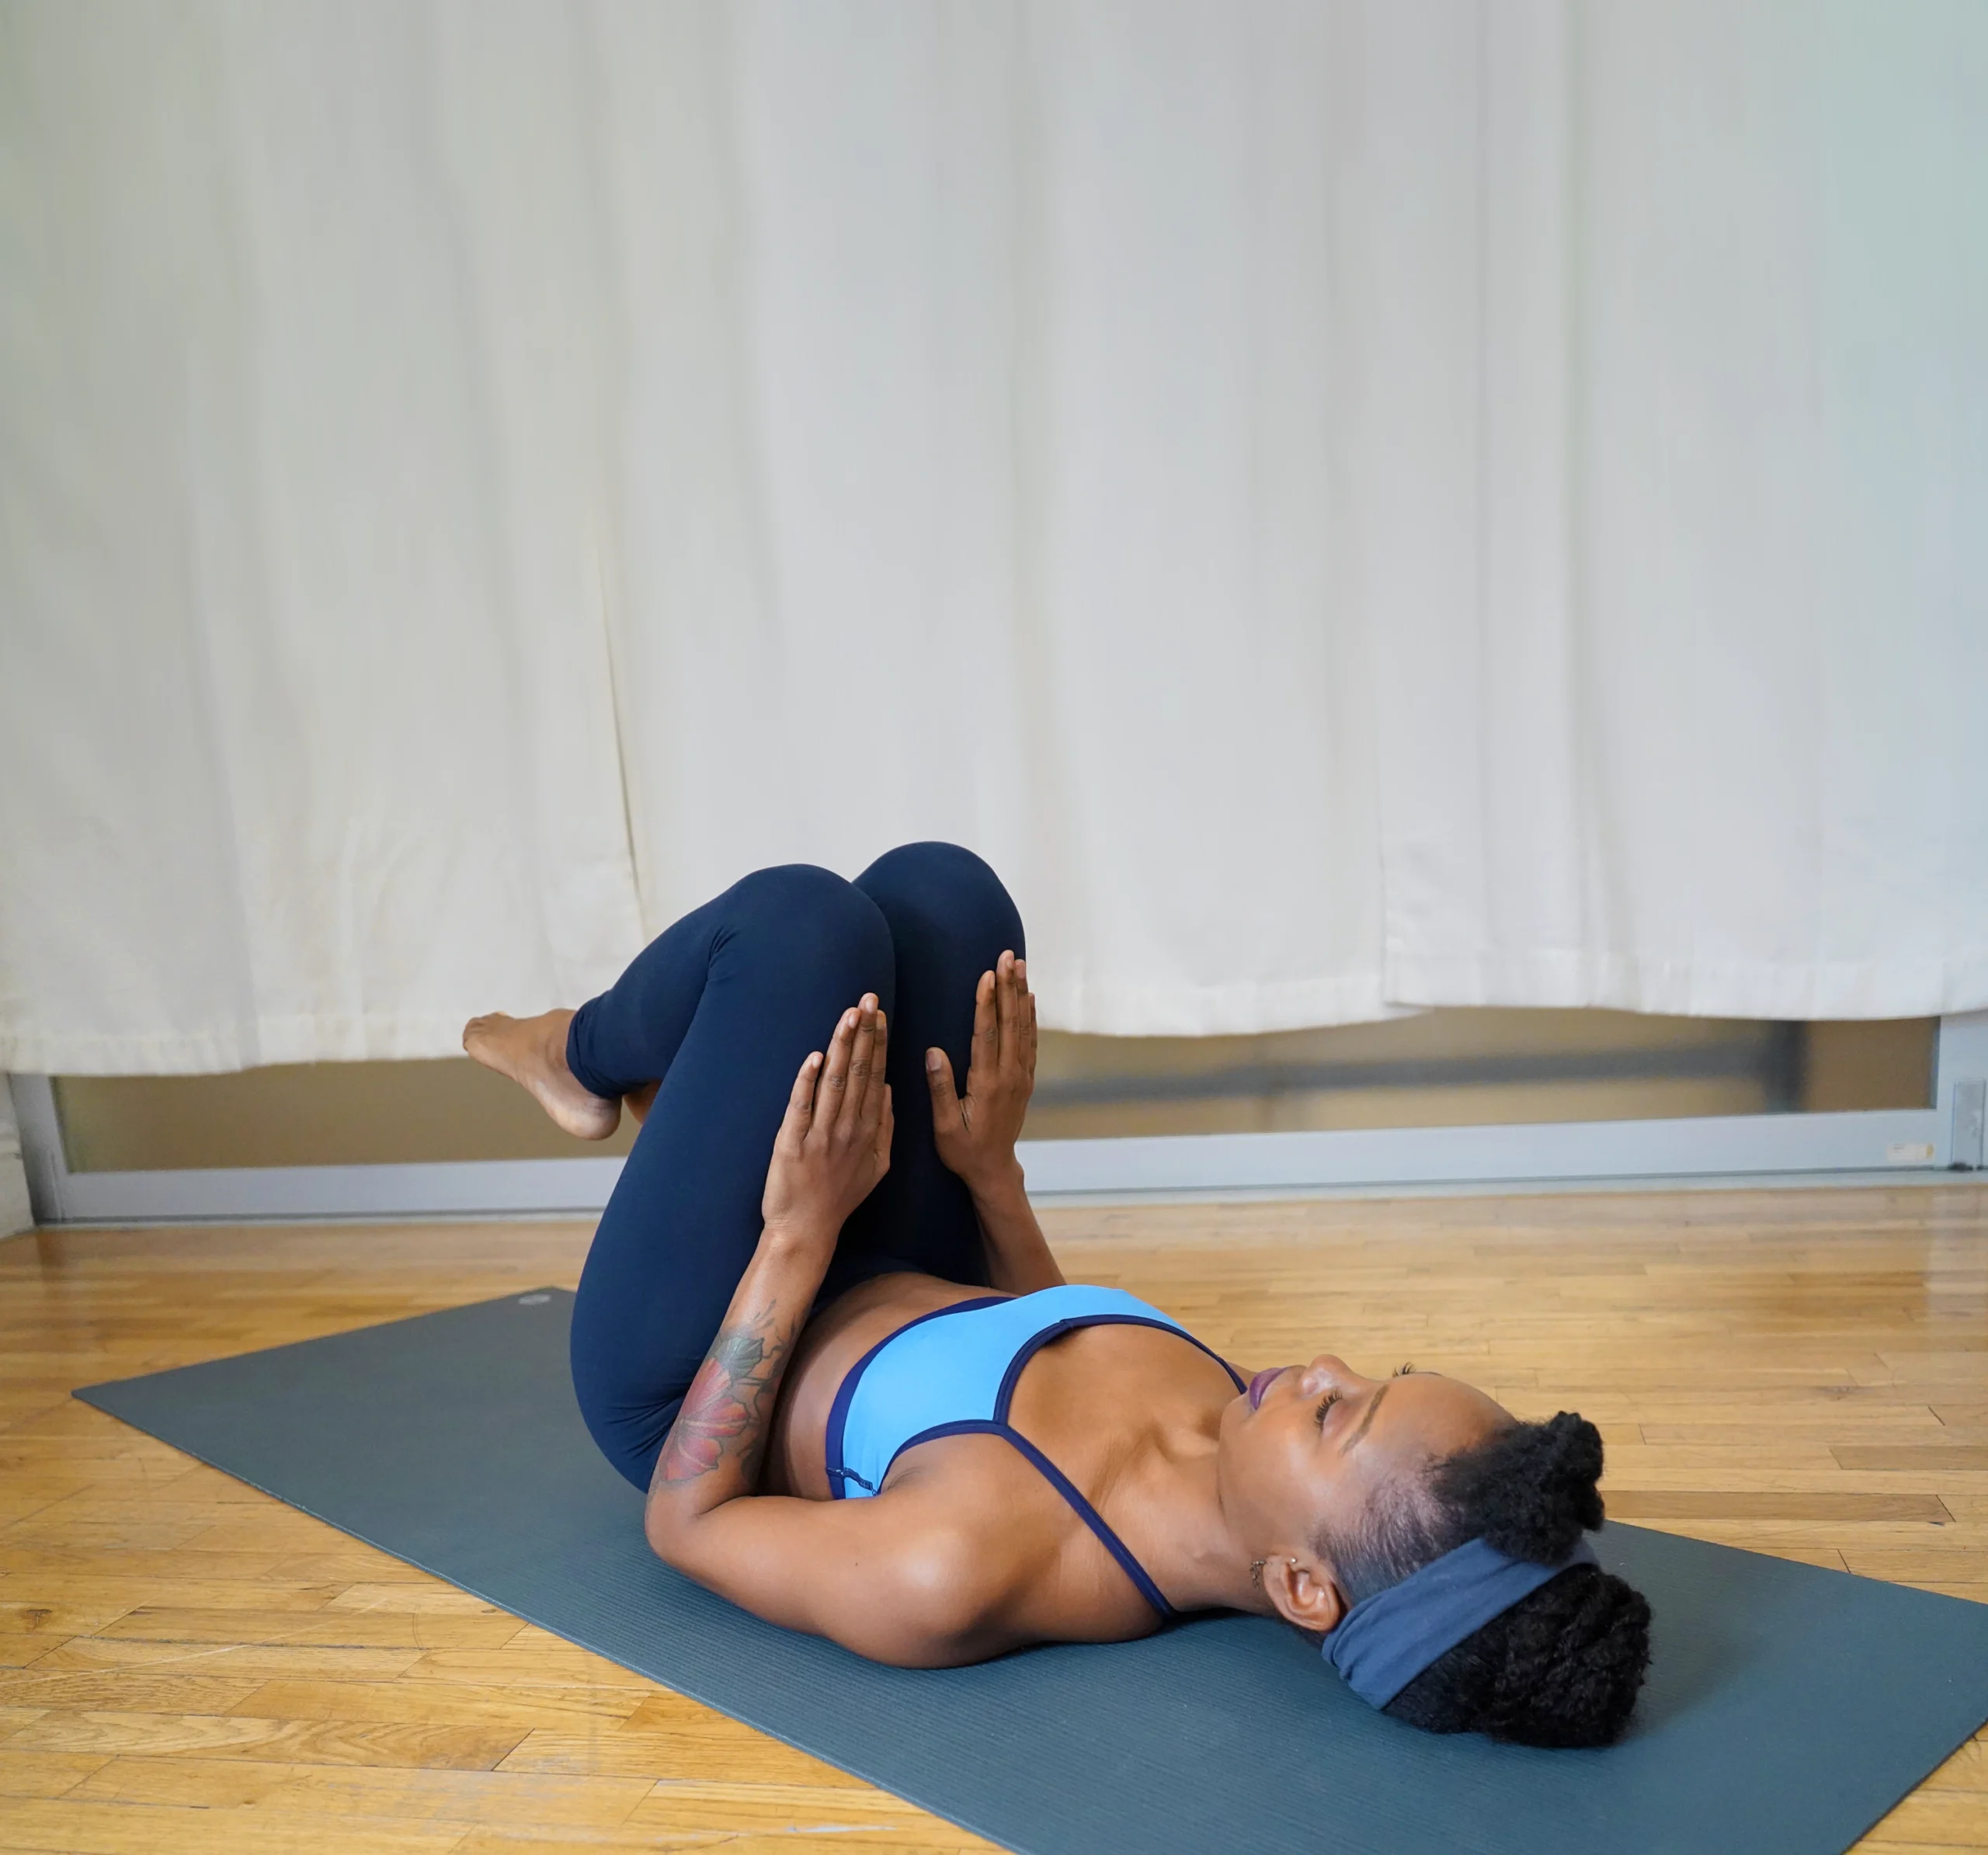 A female dancer in dark blue leggings and a light blue sports bra lays on a yoga mat and does an isometric core exercise. She bends both leg in towards her chest and pushes down on her thighs with both palms.